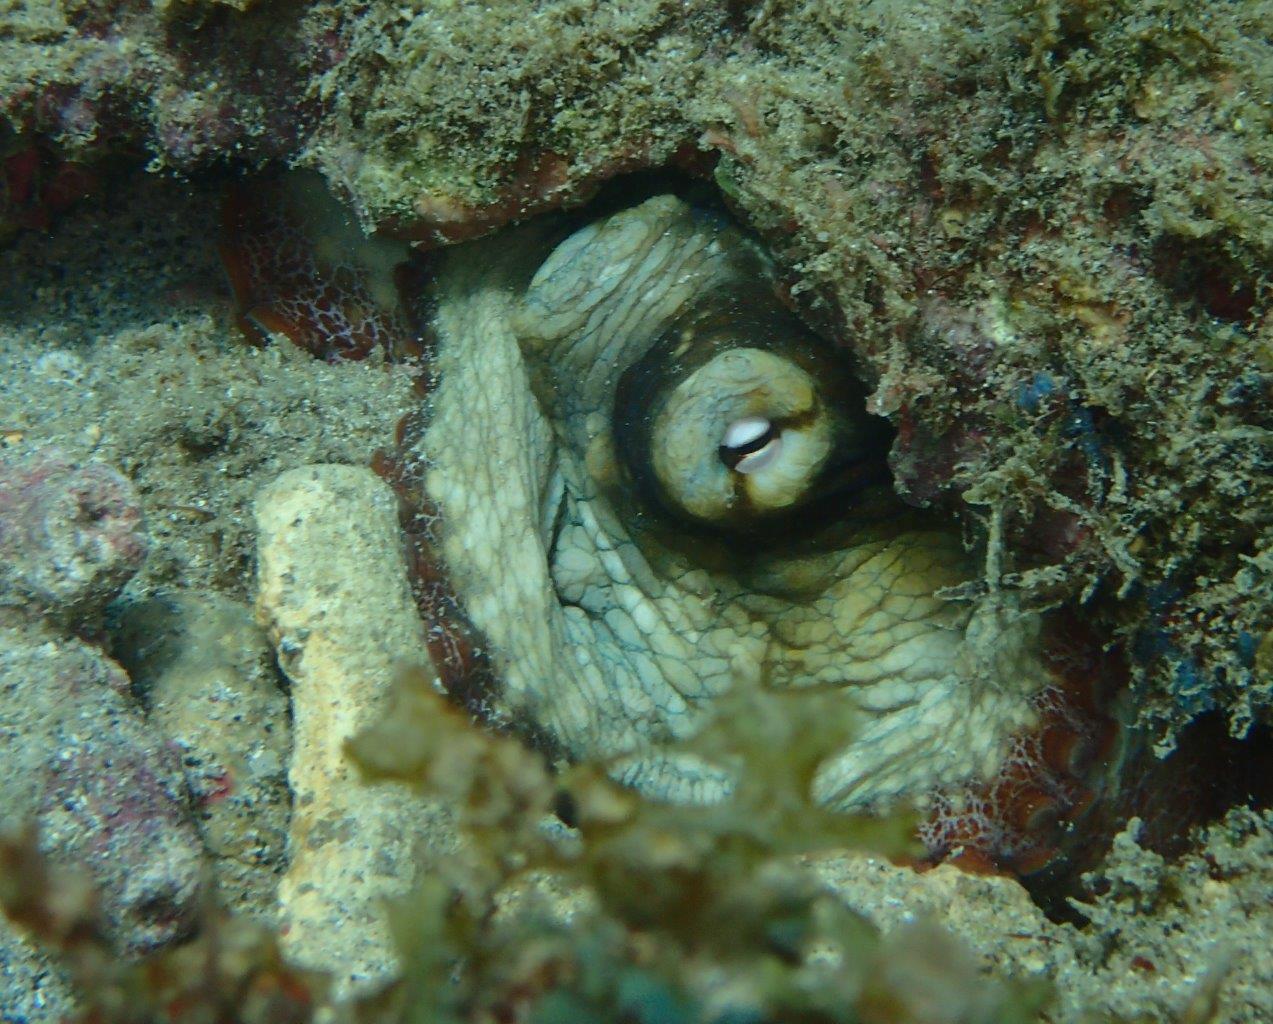 A common octopus trying to hide